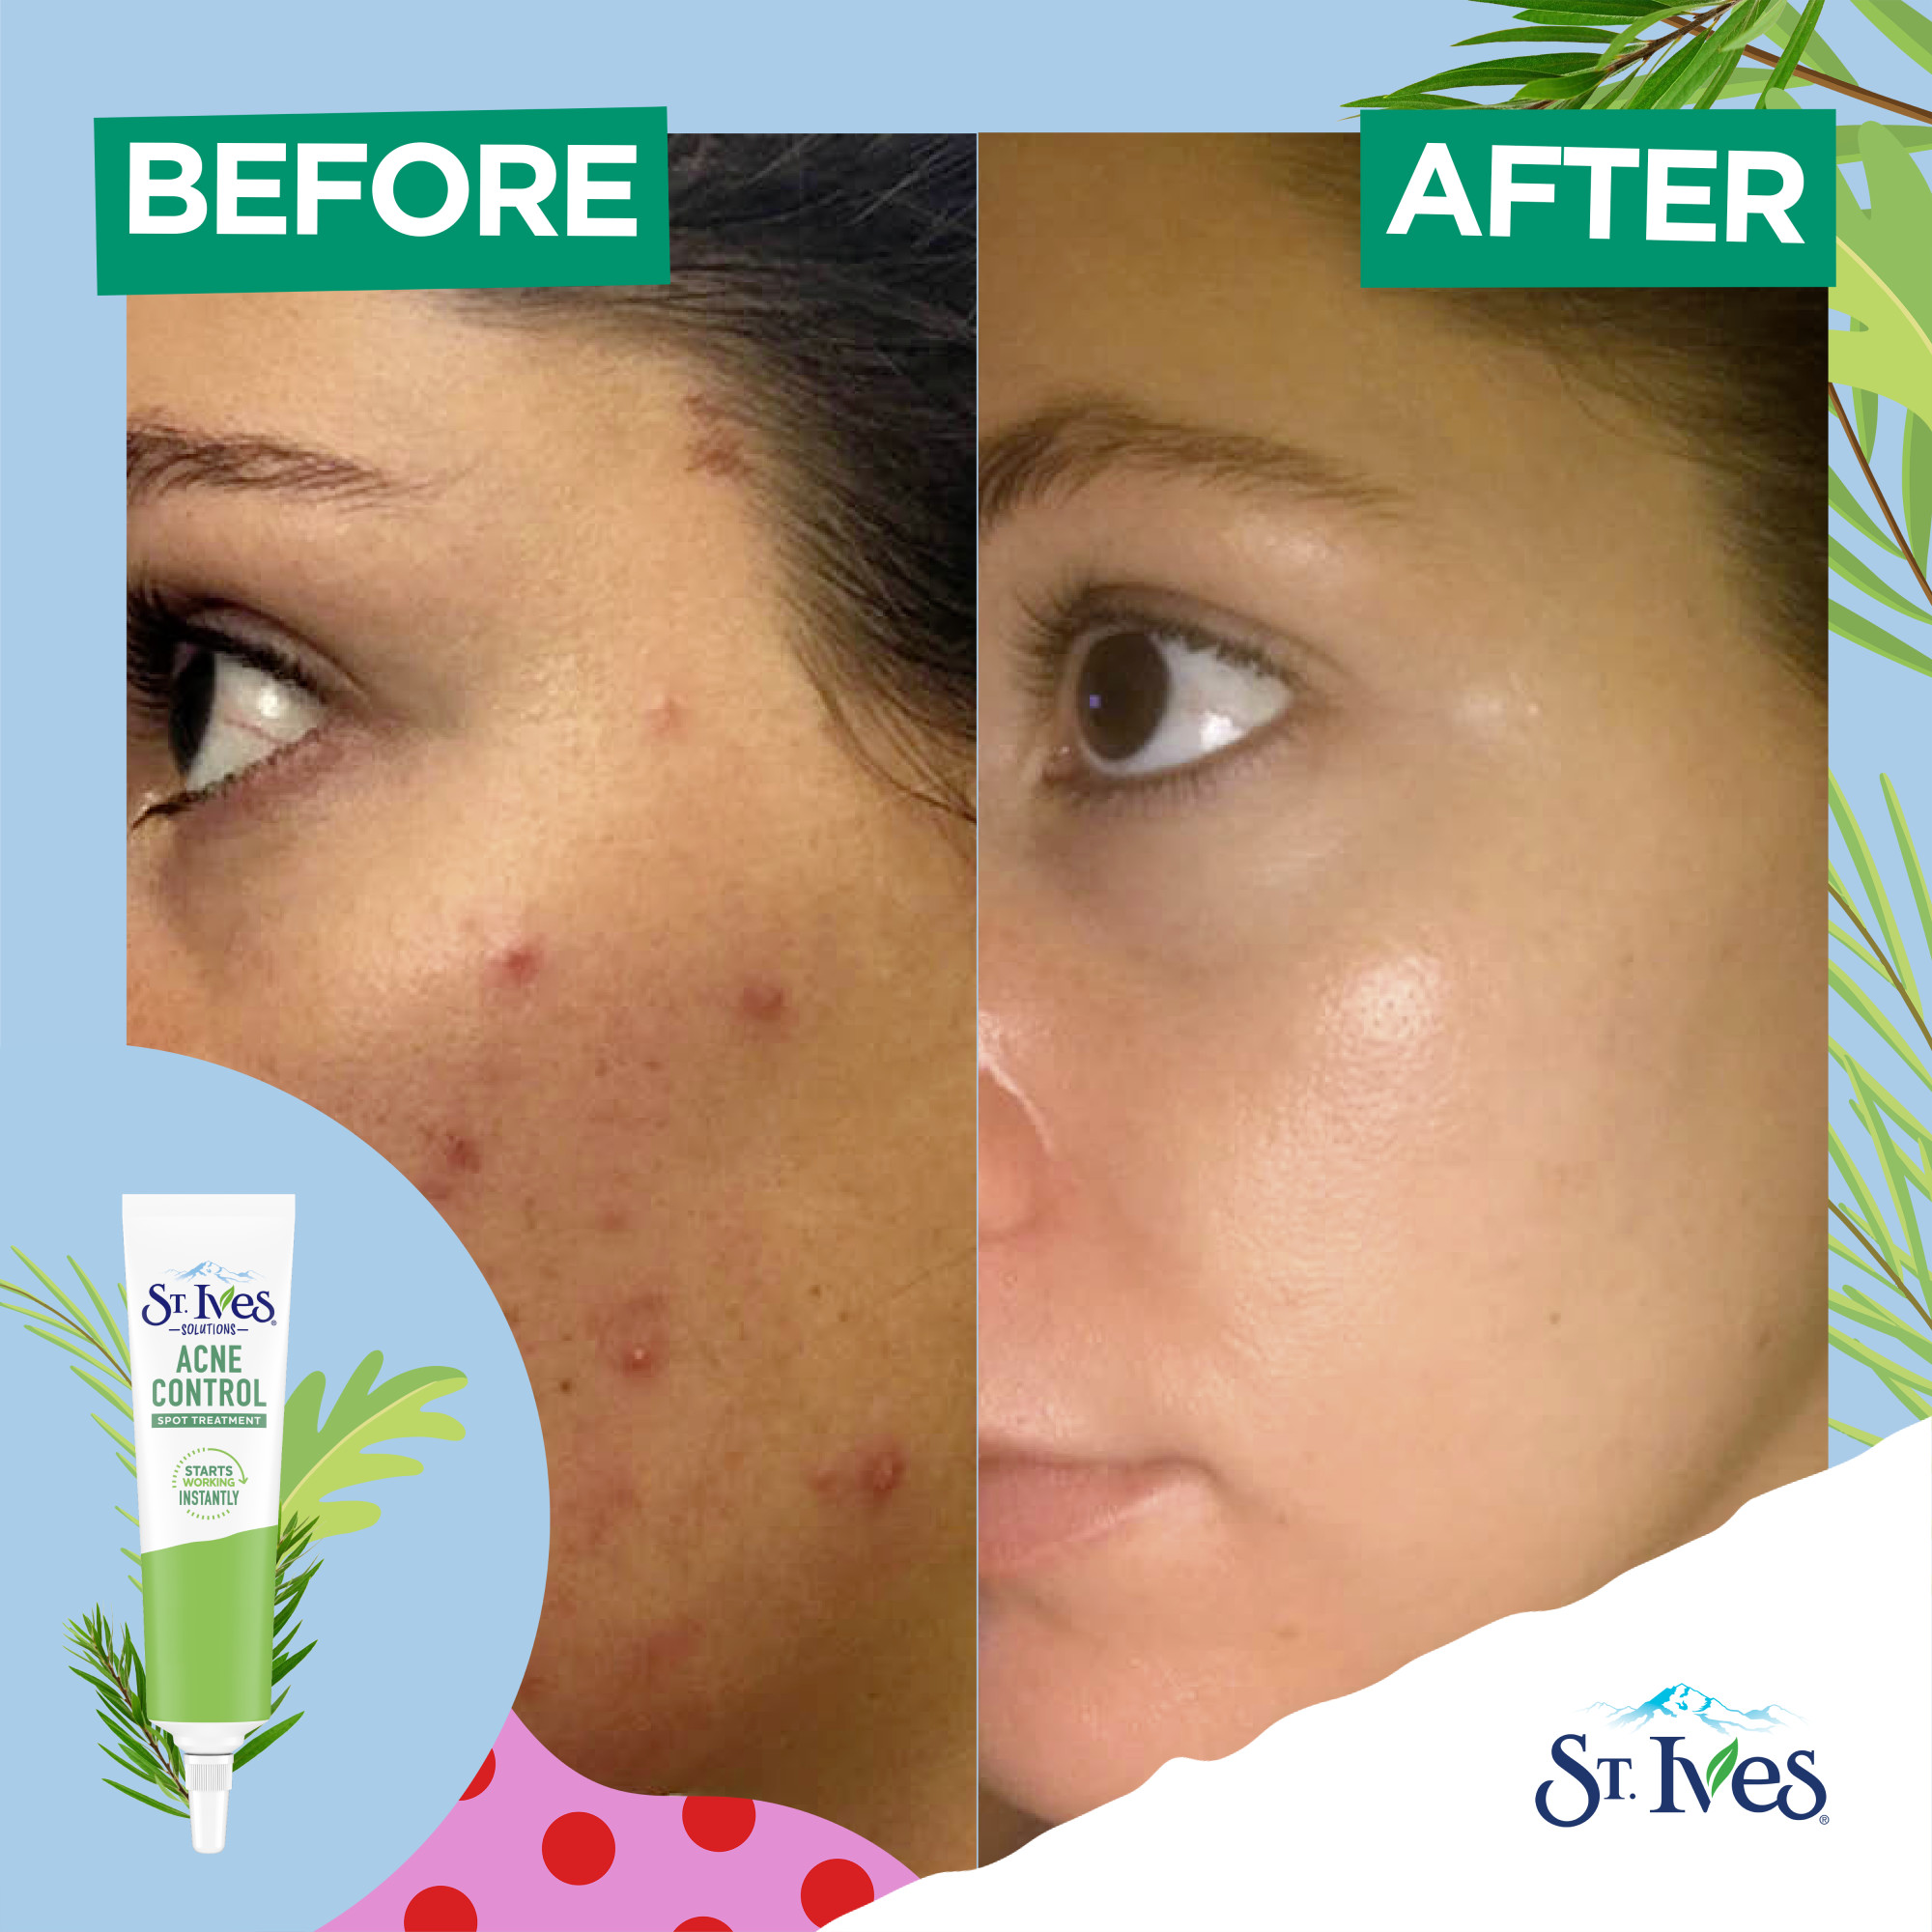 St. Ives Solutions Spot Treatment For Blemish Redness Reduction Acne Control Made with 2% Salicylic Acid and 100% Natural Tea Tree Extract 0.75 oz - image 4 of 16